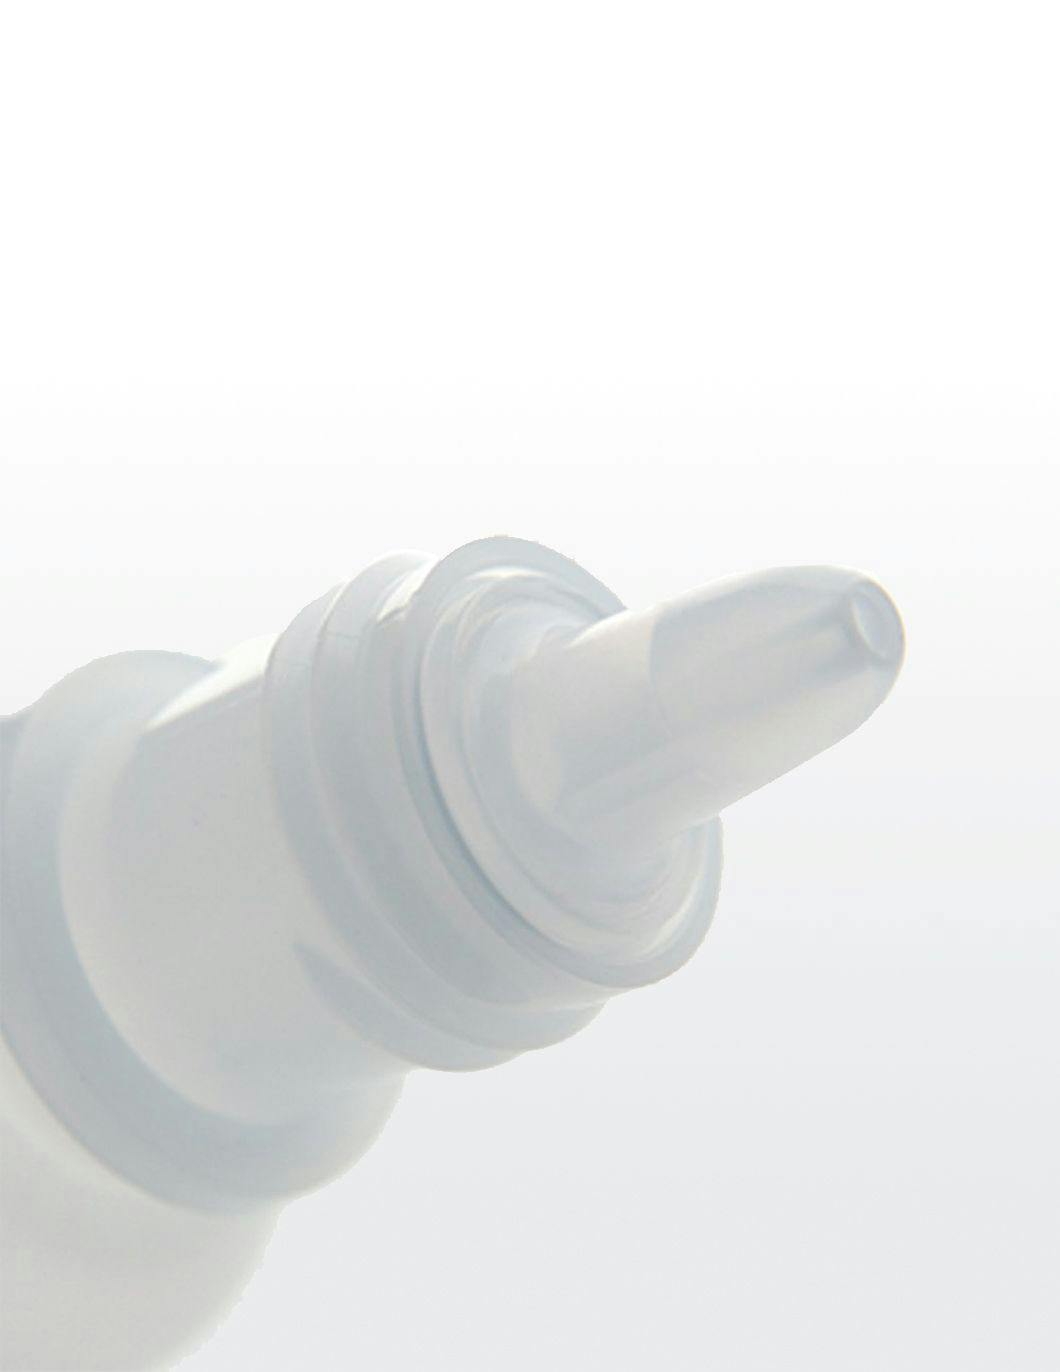 ophthalmic-bottles-15ml-with-40mi-dropper-opening